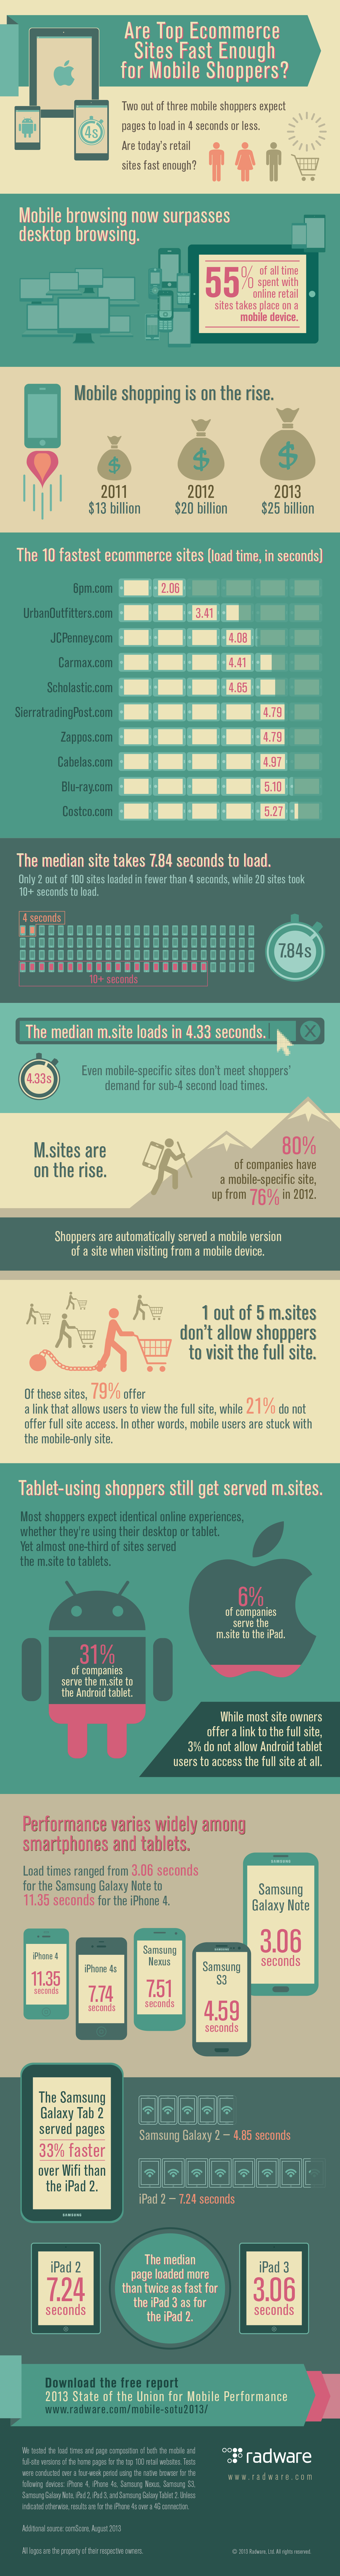 2013 State of the Union: Mobile Ecommerce Performance Infographic